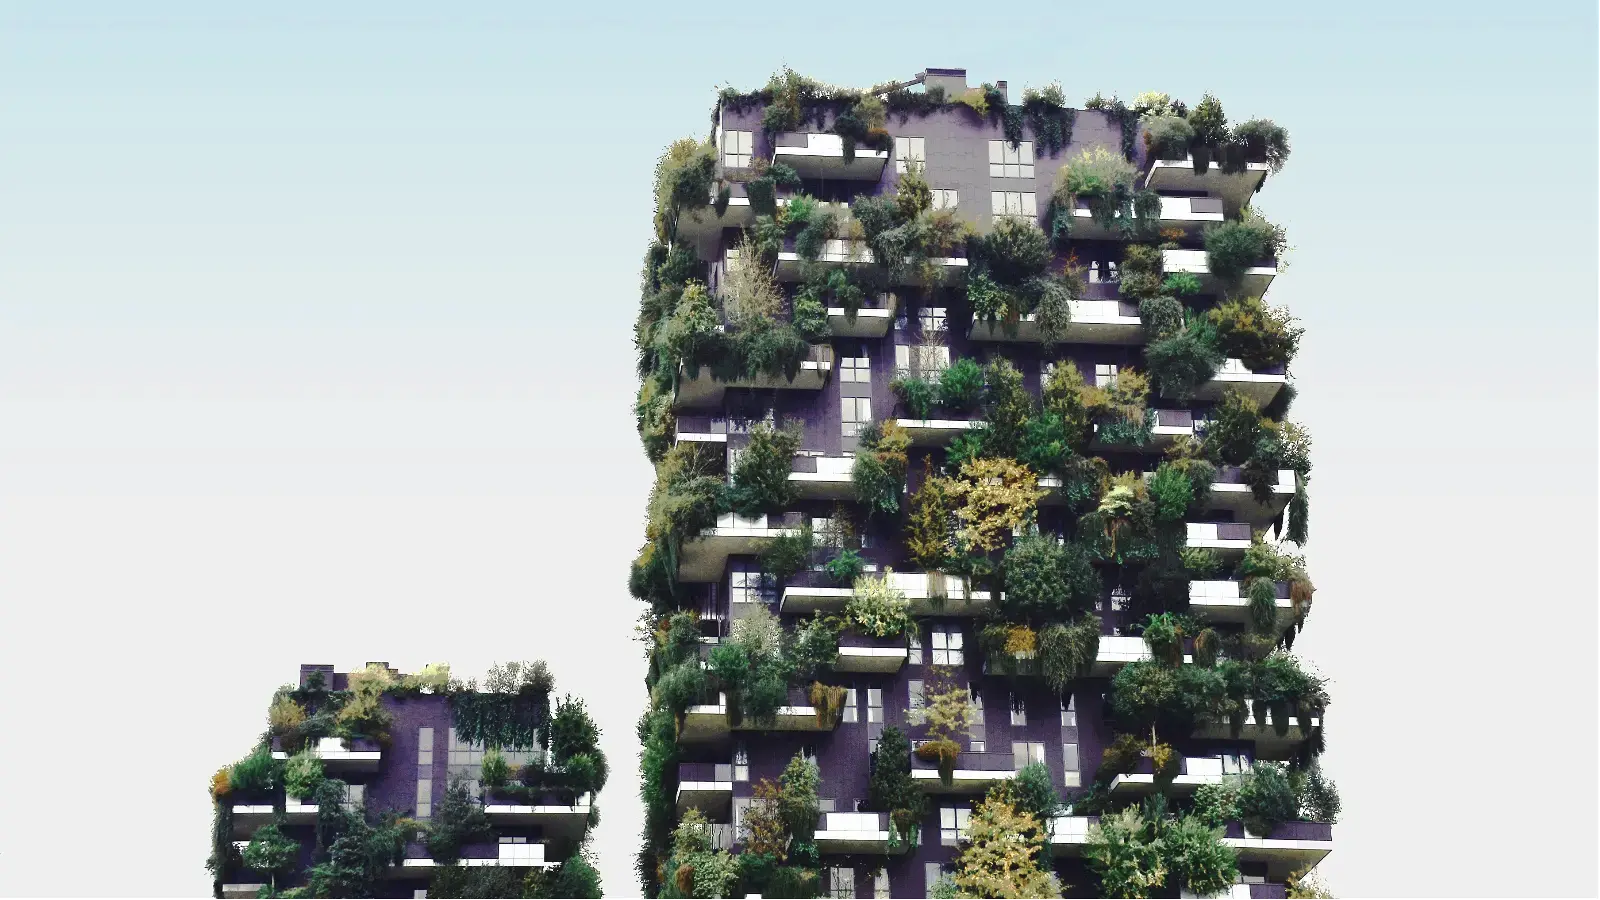 Architects take inspiration from nature to build sustainable future